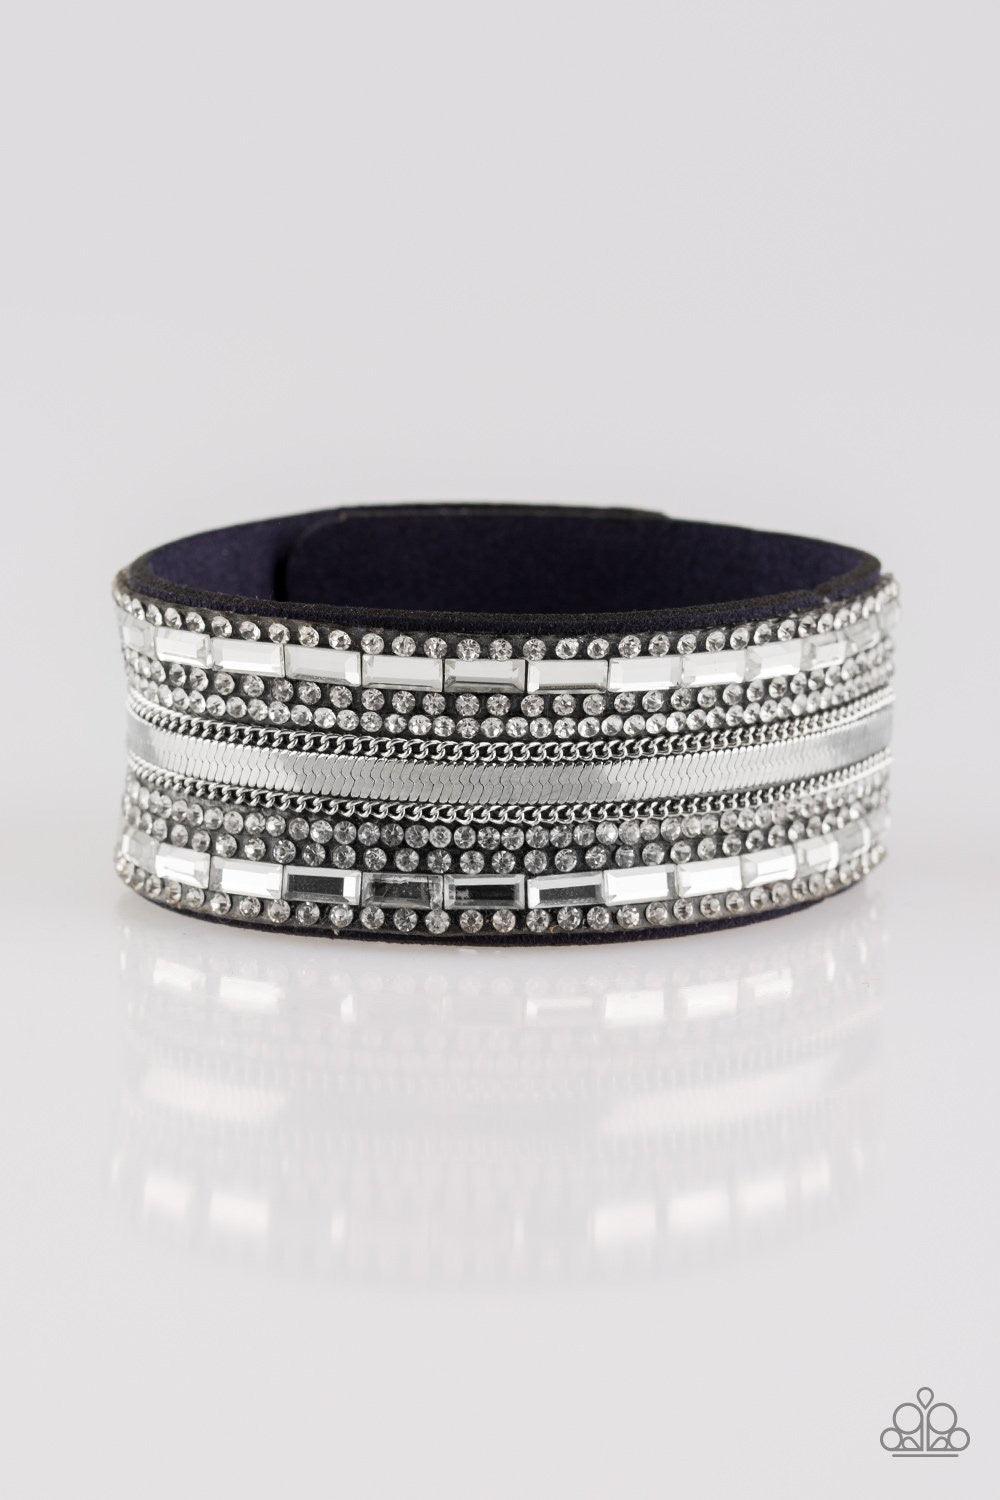 Paparazzi Accessories Teasingly Tomboy - Blue Mismatched silver chains, glassy emerald-cut, and glittery white rhinestones are encrusted along a thick blue suede band for a sassy look. Features an adjustable snap closure. Sold as one individual bracelet.